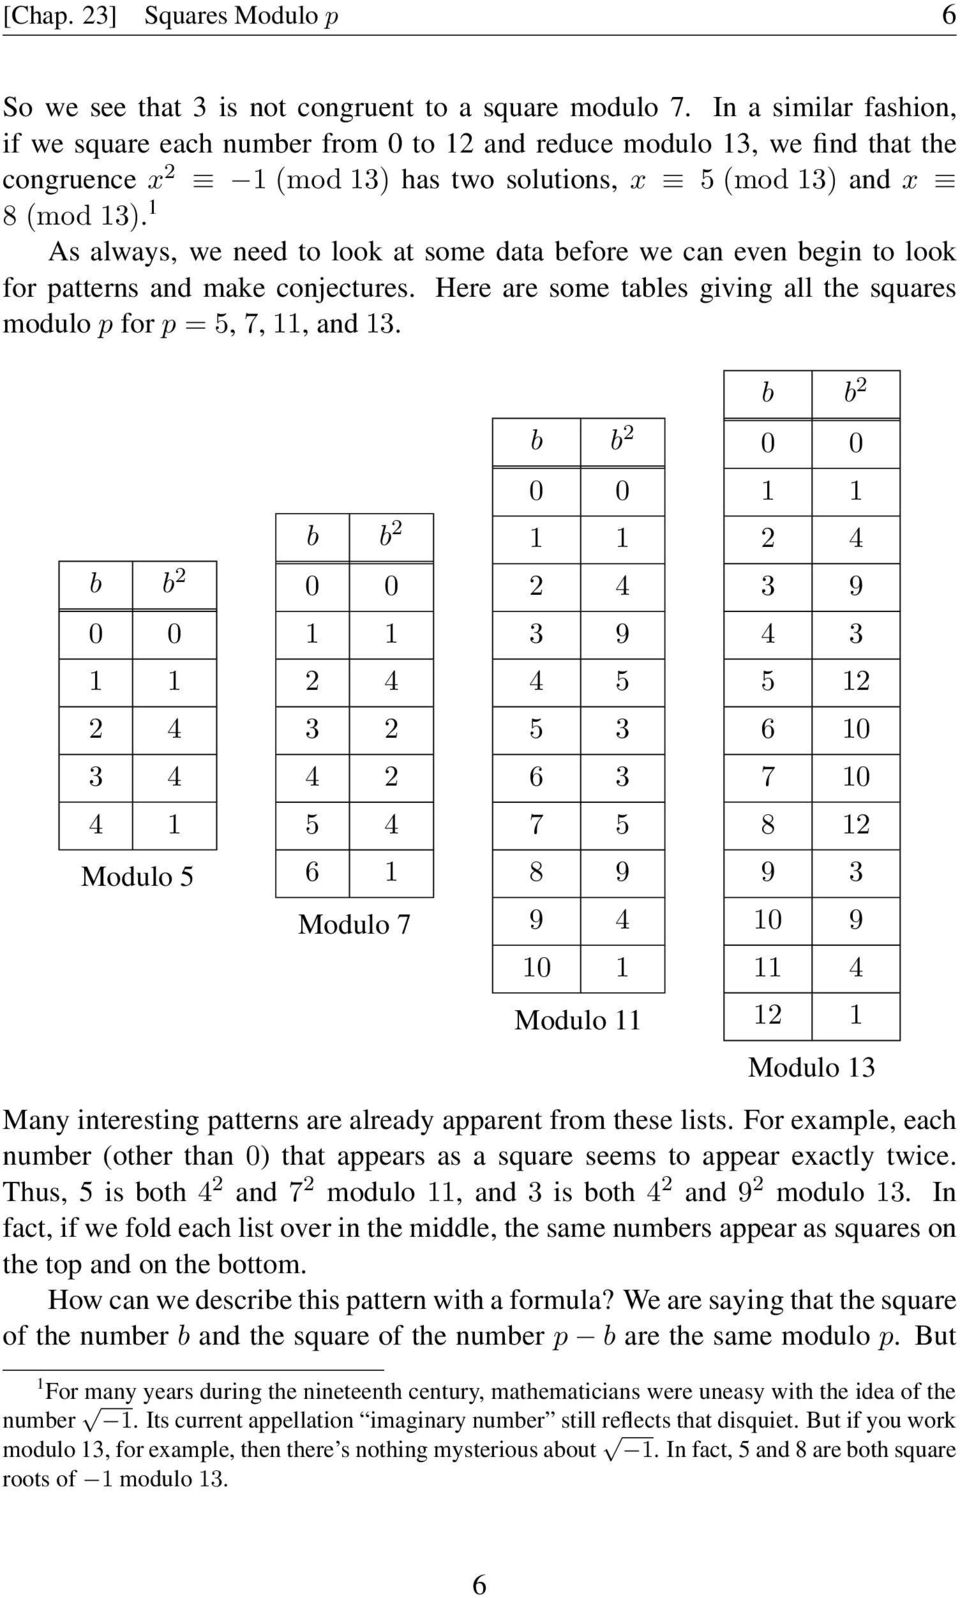 1 As always, we need to look at some data before we can even begin to look for patterns and make conjectures. Here are some tables giving all the squares modulo p for p = 5, 7, 11, and 13.